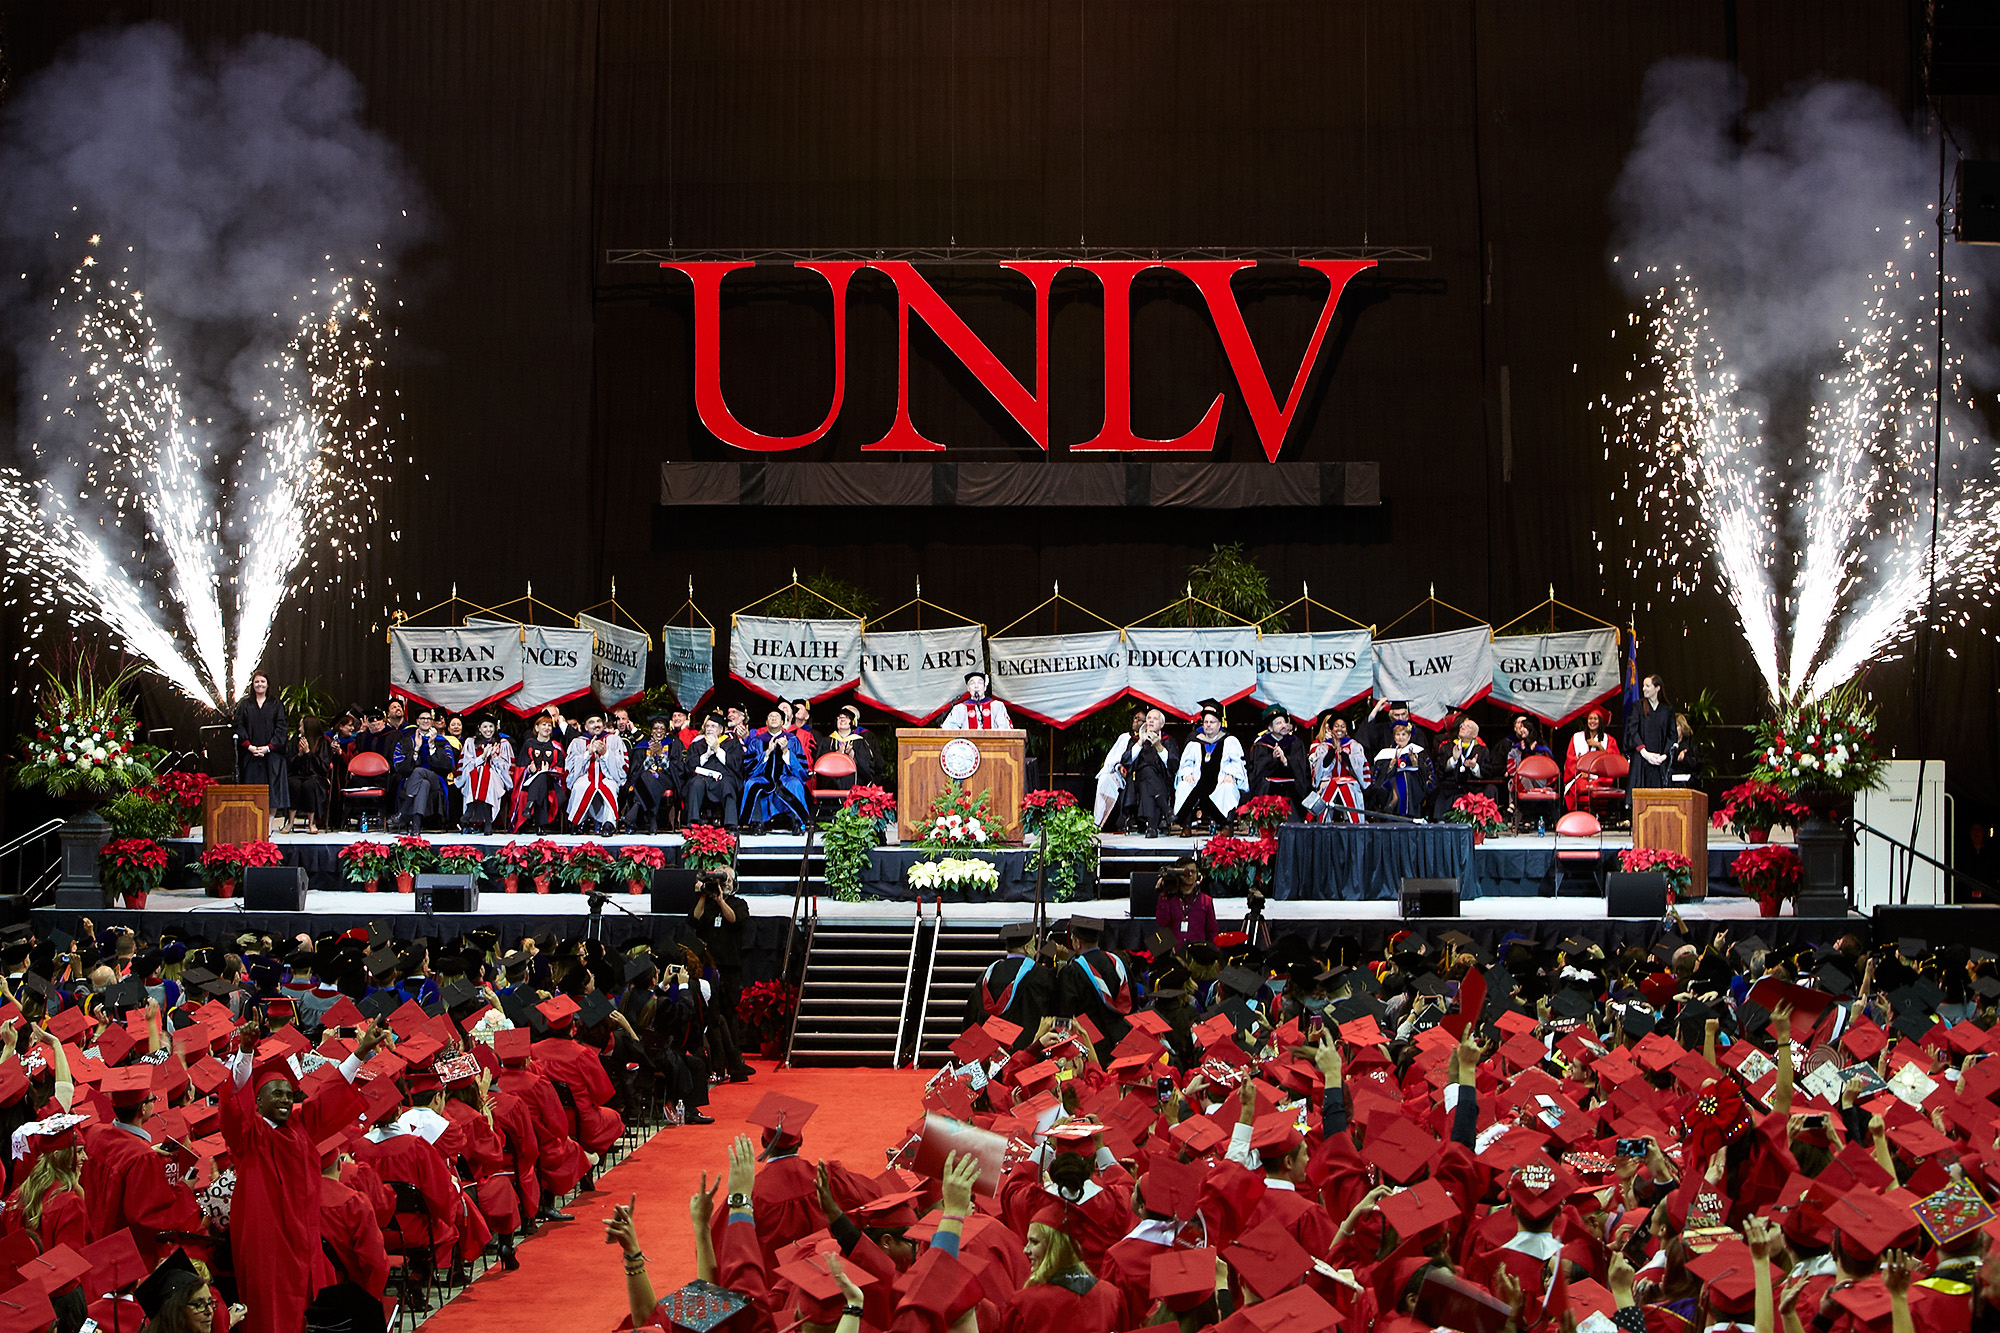 More than 2,700 New Grads Expected at UNLV Commencement May 16 News